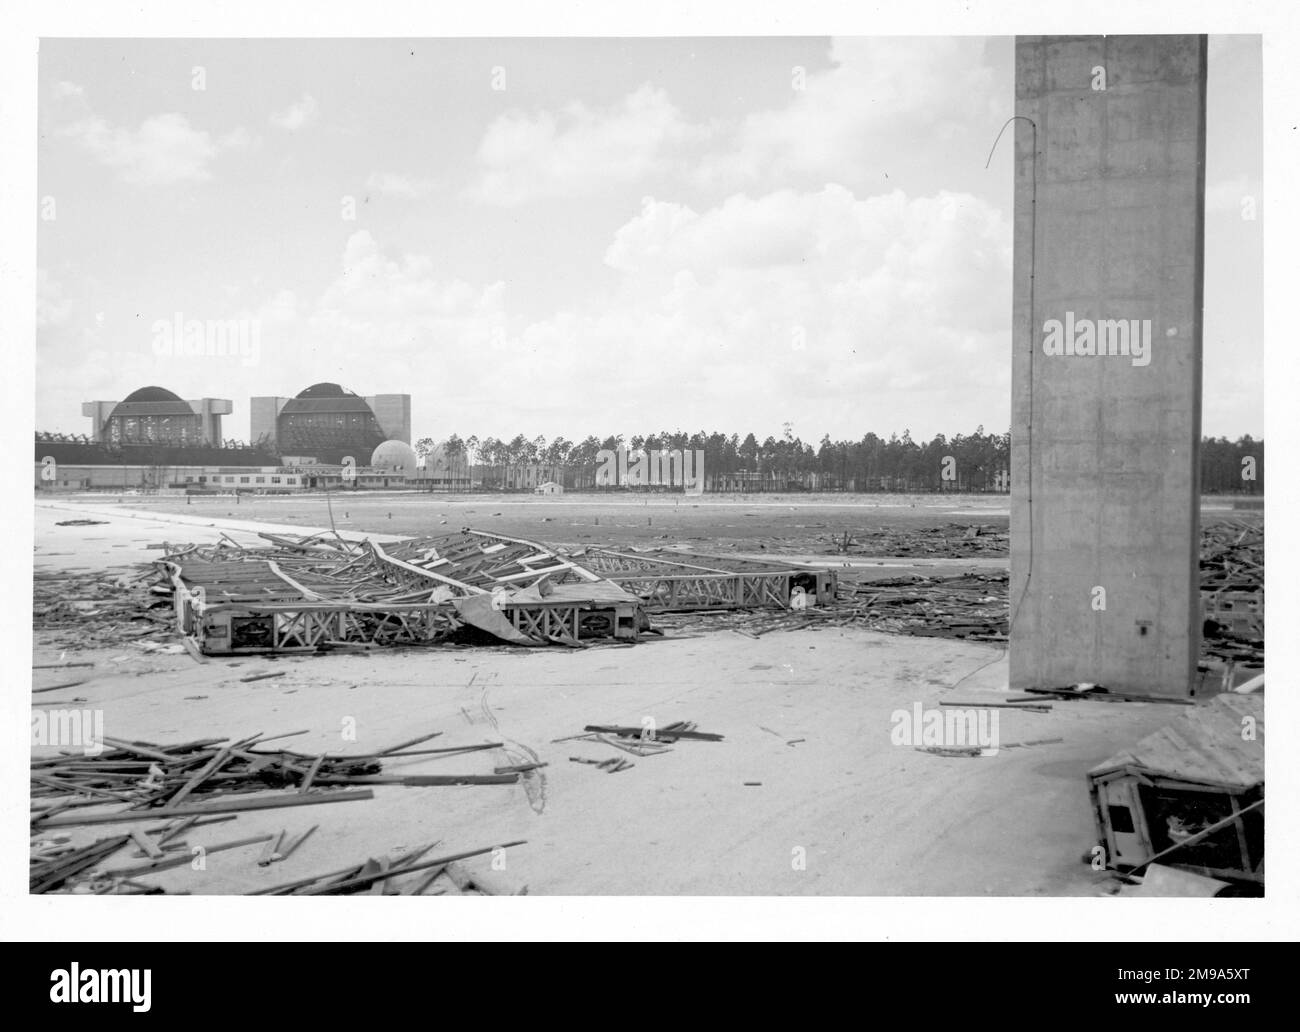 United States Navy - Richmond Naval Air Station (Richmond NAS), just west of Miami, showing the destroyed, huge, airship hangars which burnt down during Hurricane Nine on 15 September 1945 (three years, to the day, after the air station was commissioned). The hurricane ignited a fire in an adjacent building which spread to Three Airship hangars destroying 25 blimps, 366 airplanes, and 150 automobiles which were stored inside for shelter from the storm, which was also known as the 1945 Homestead hurricane. Stock Photo